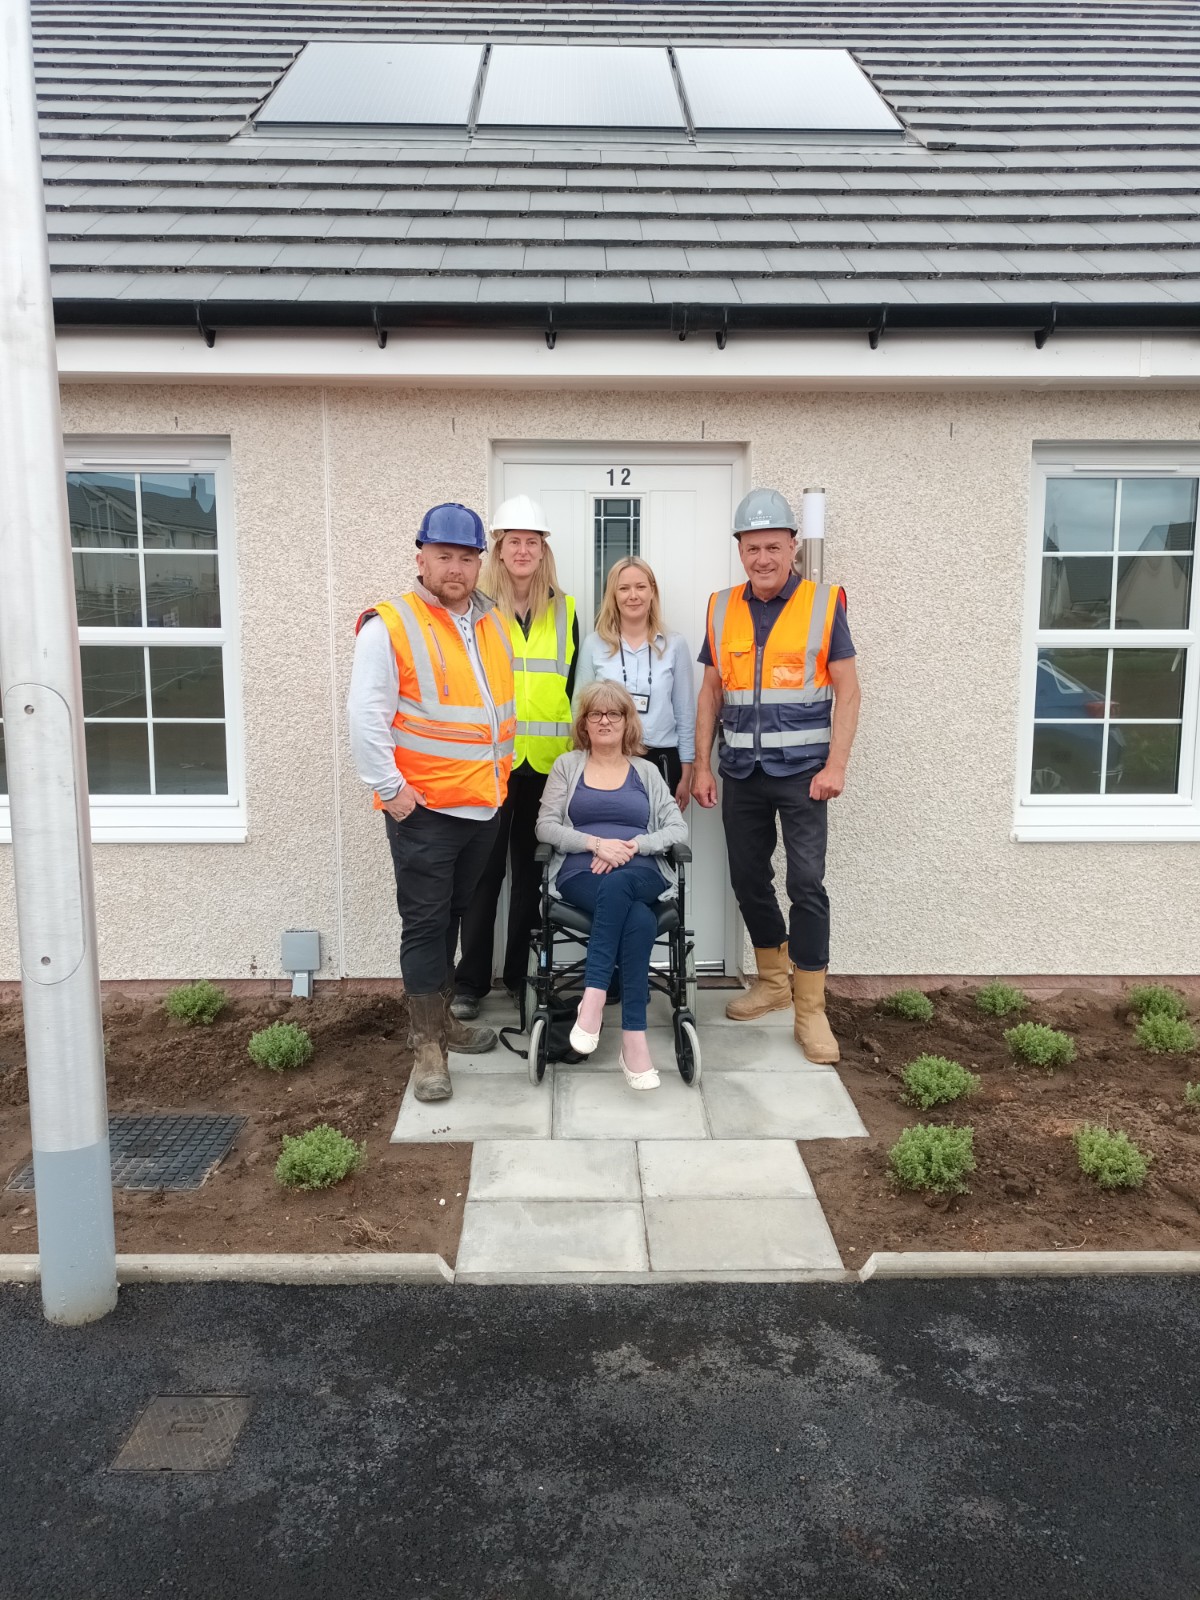 New tenants welcomed to sustainable homes in Elgin